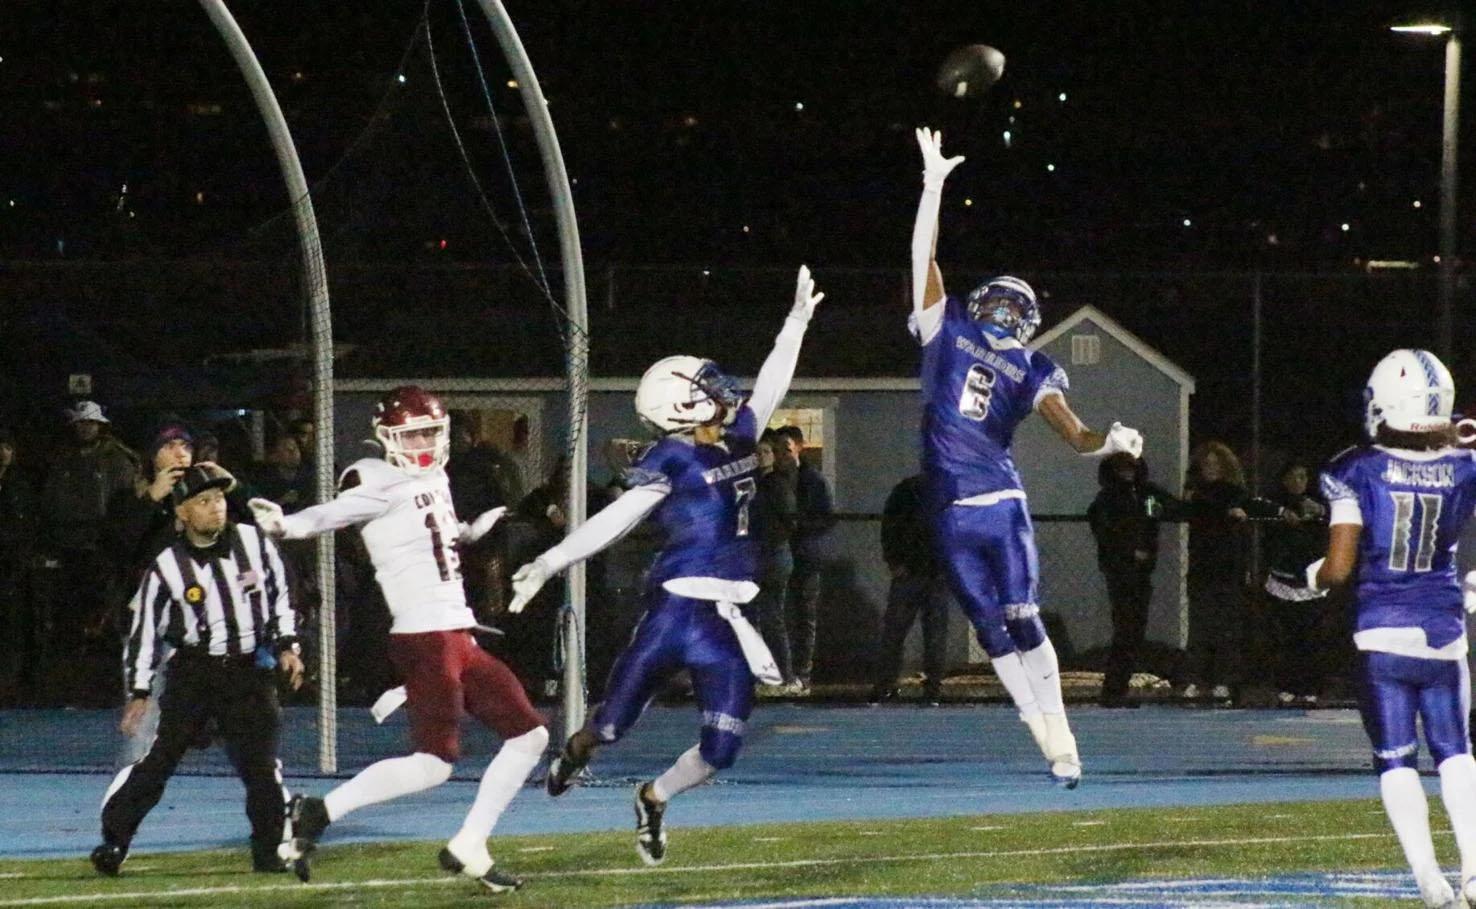 South City senior Justice Goodman, right, defends with Darren Miller, middle, on a potential interception just out of their reach in the CIF Northern California Division 6-A regional championship game Saturday night at Clifford Field. (Terry Bernal/Daily Journal)